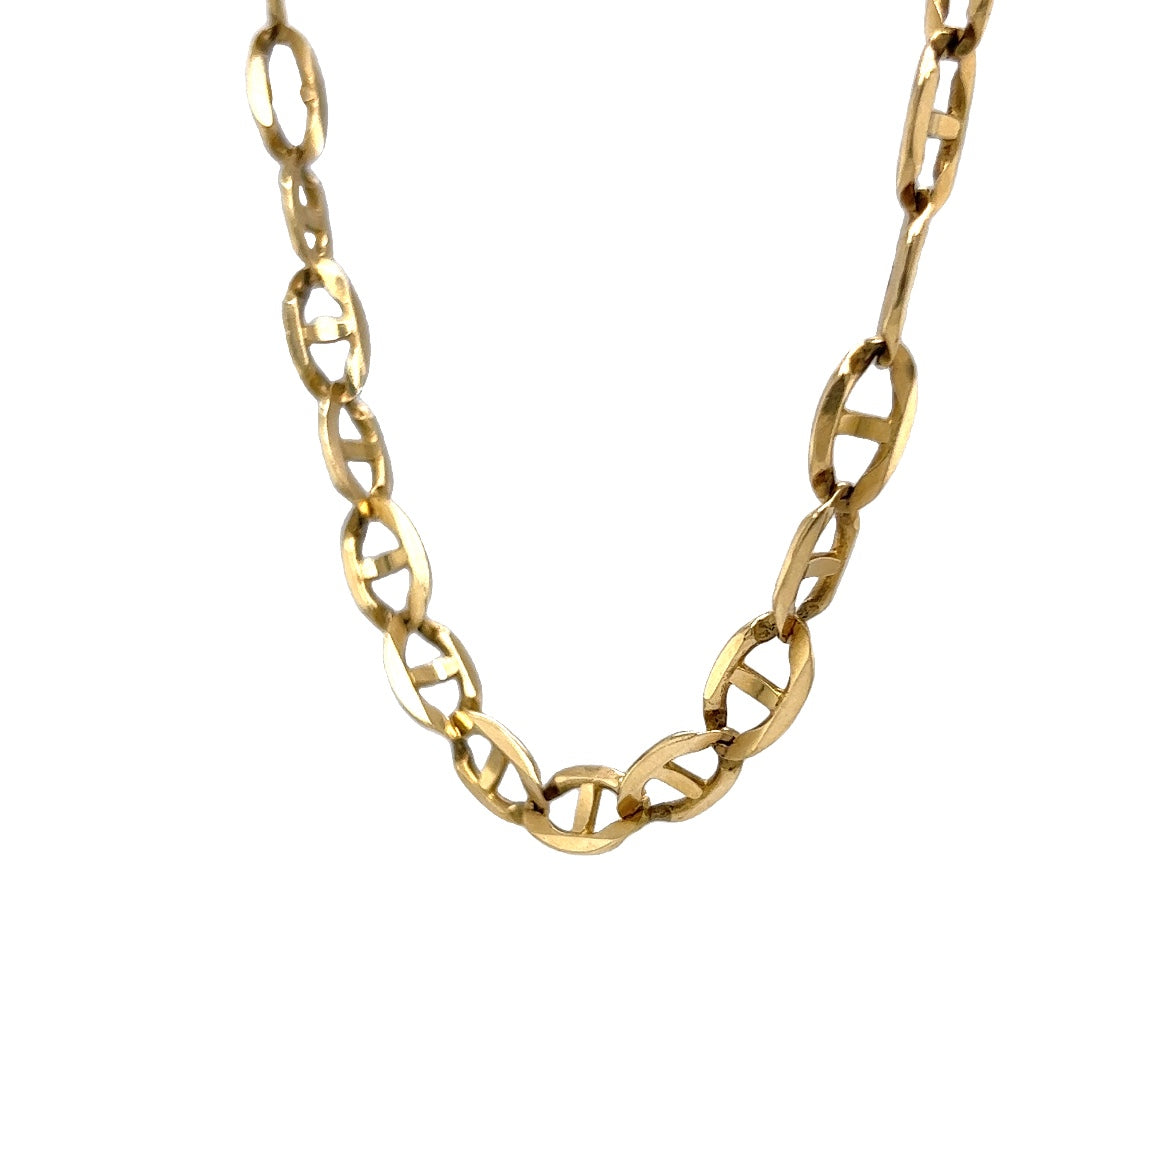 Men's 3.2mm Mariner Chain Necklace in 10K Gold - 20